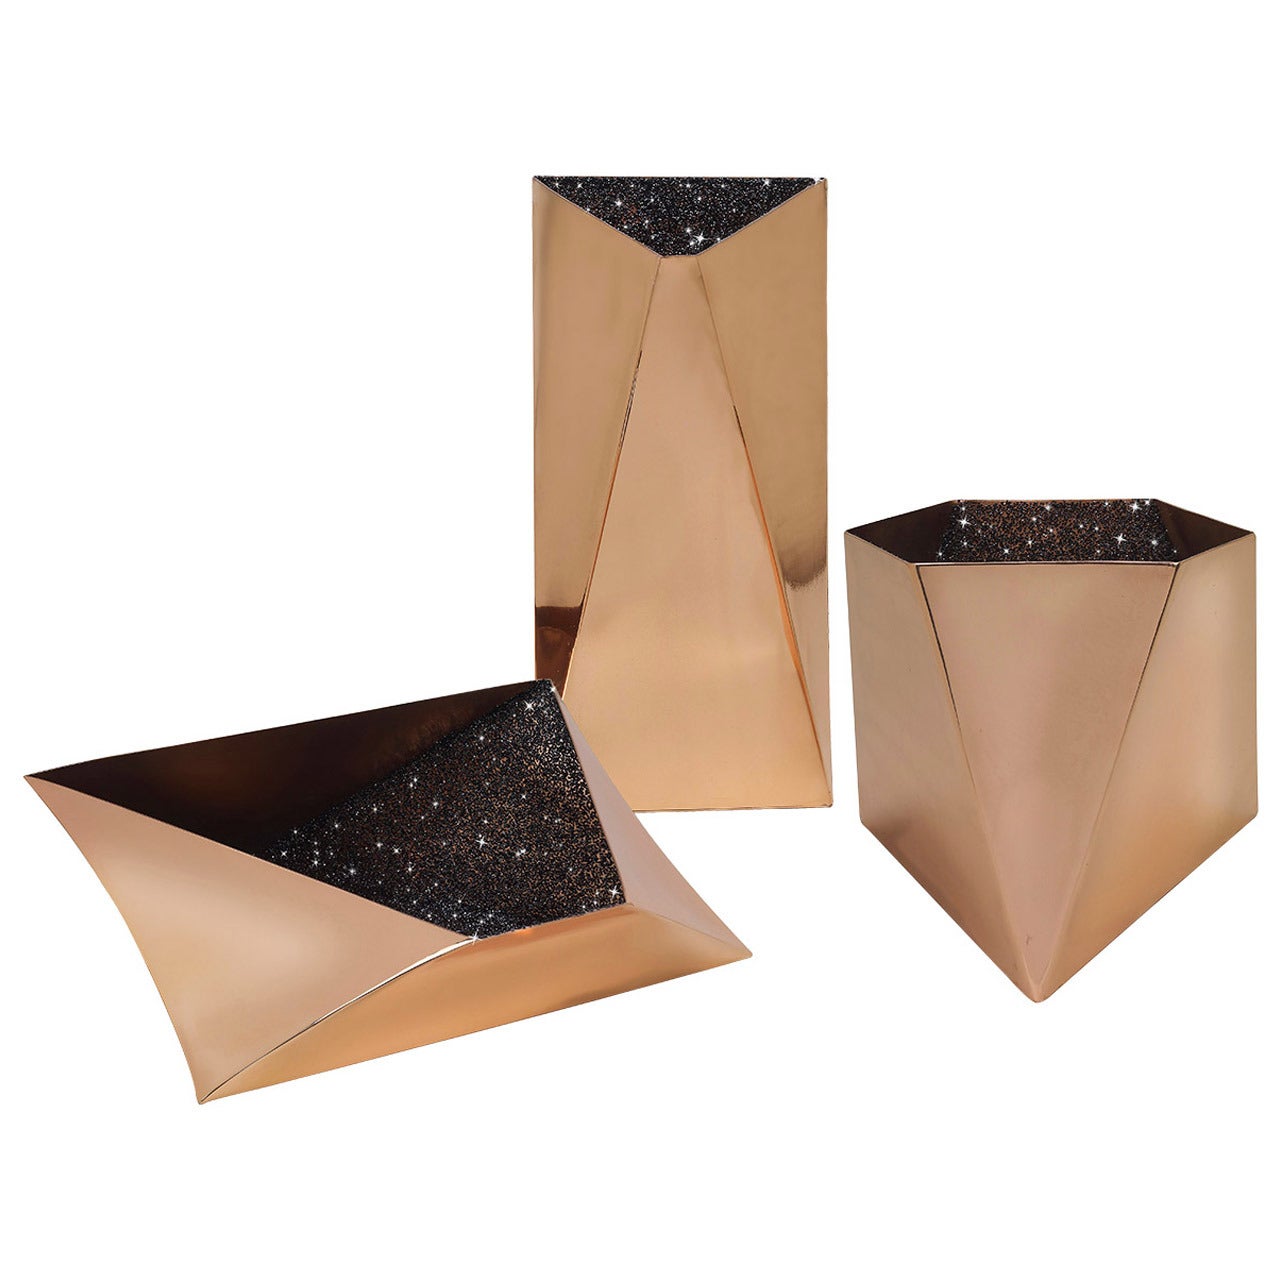 ‘Star‘ Collection Set of Three Vessels or Vases by David Adjaye For Sale